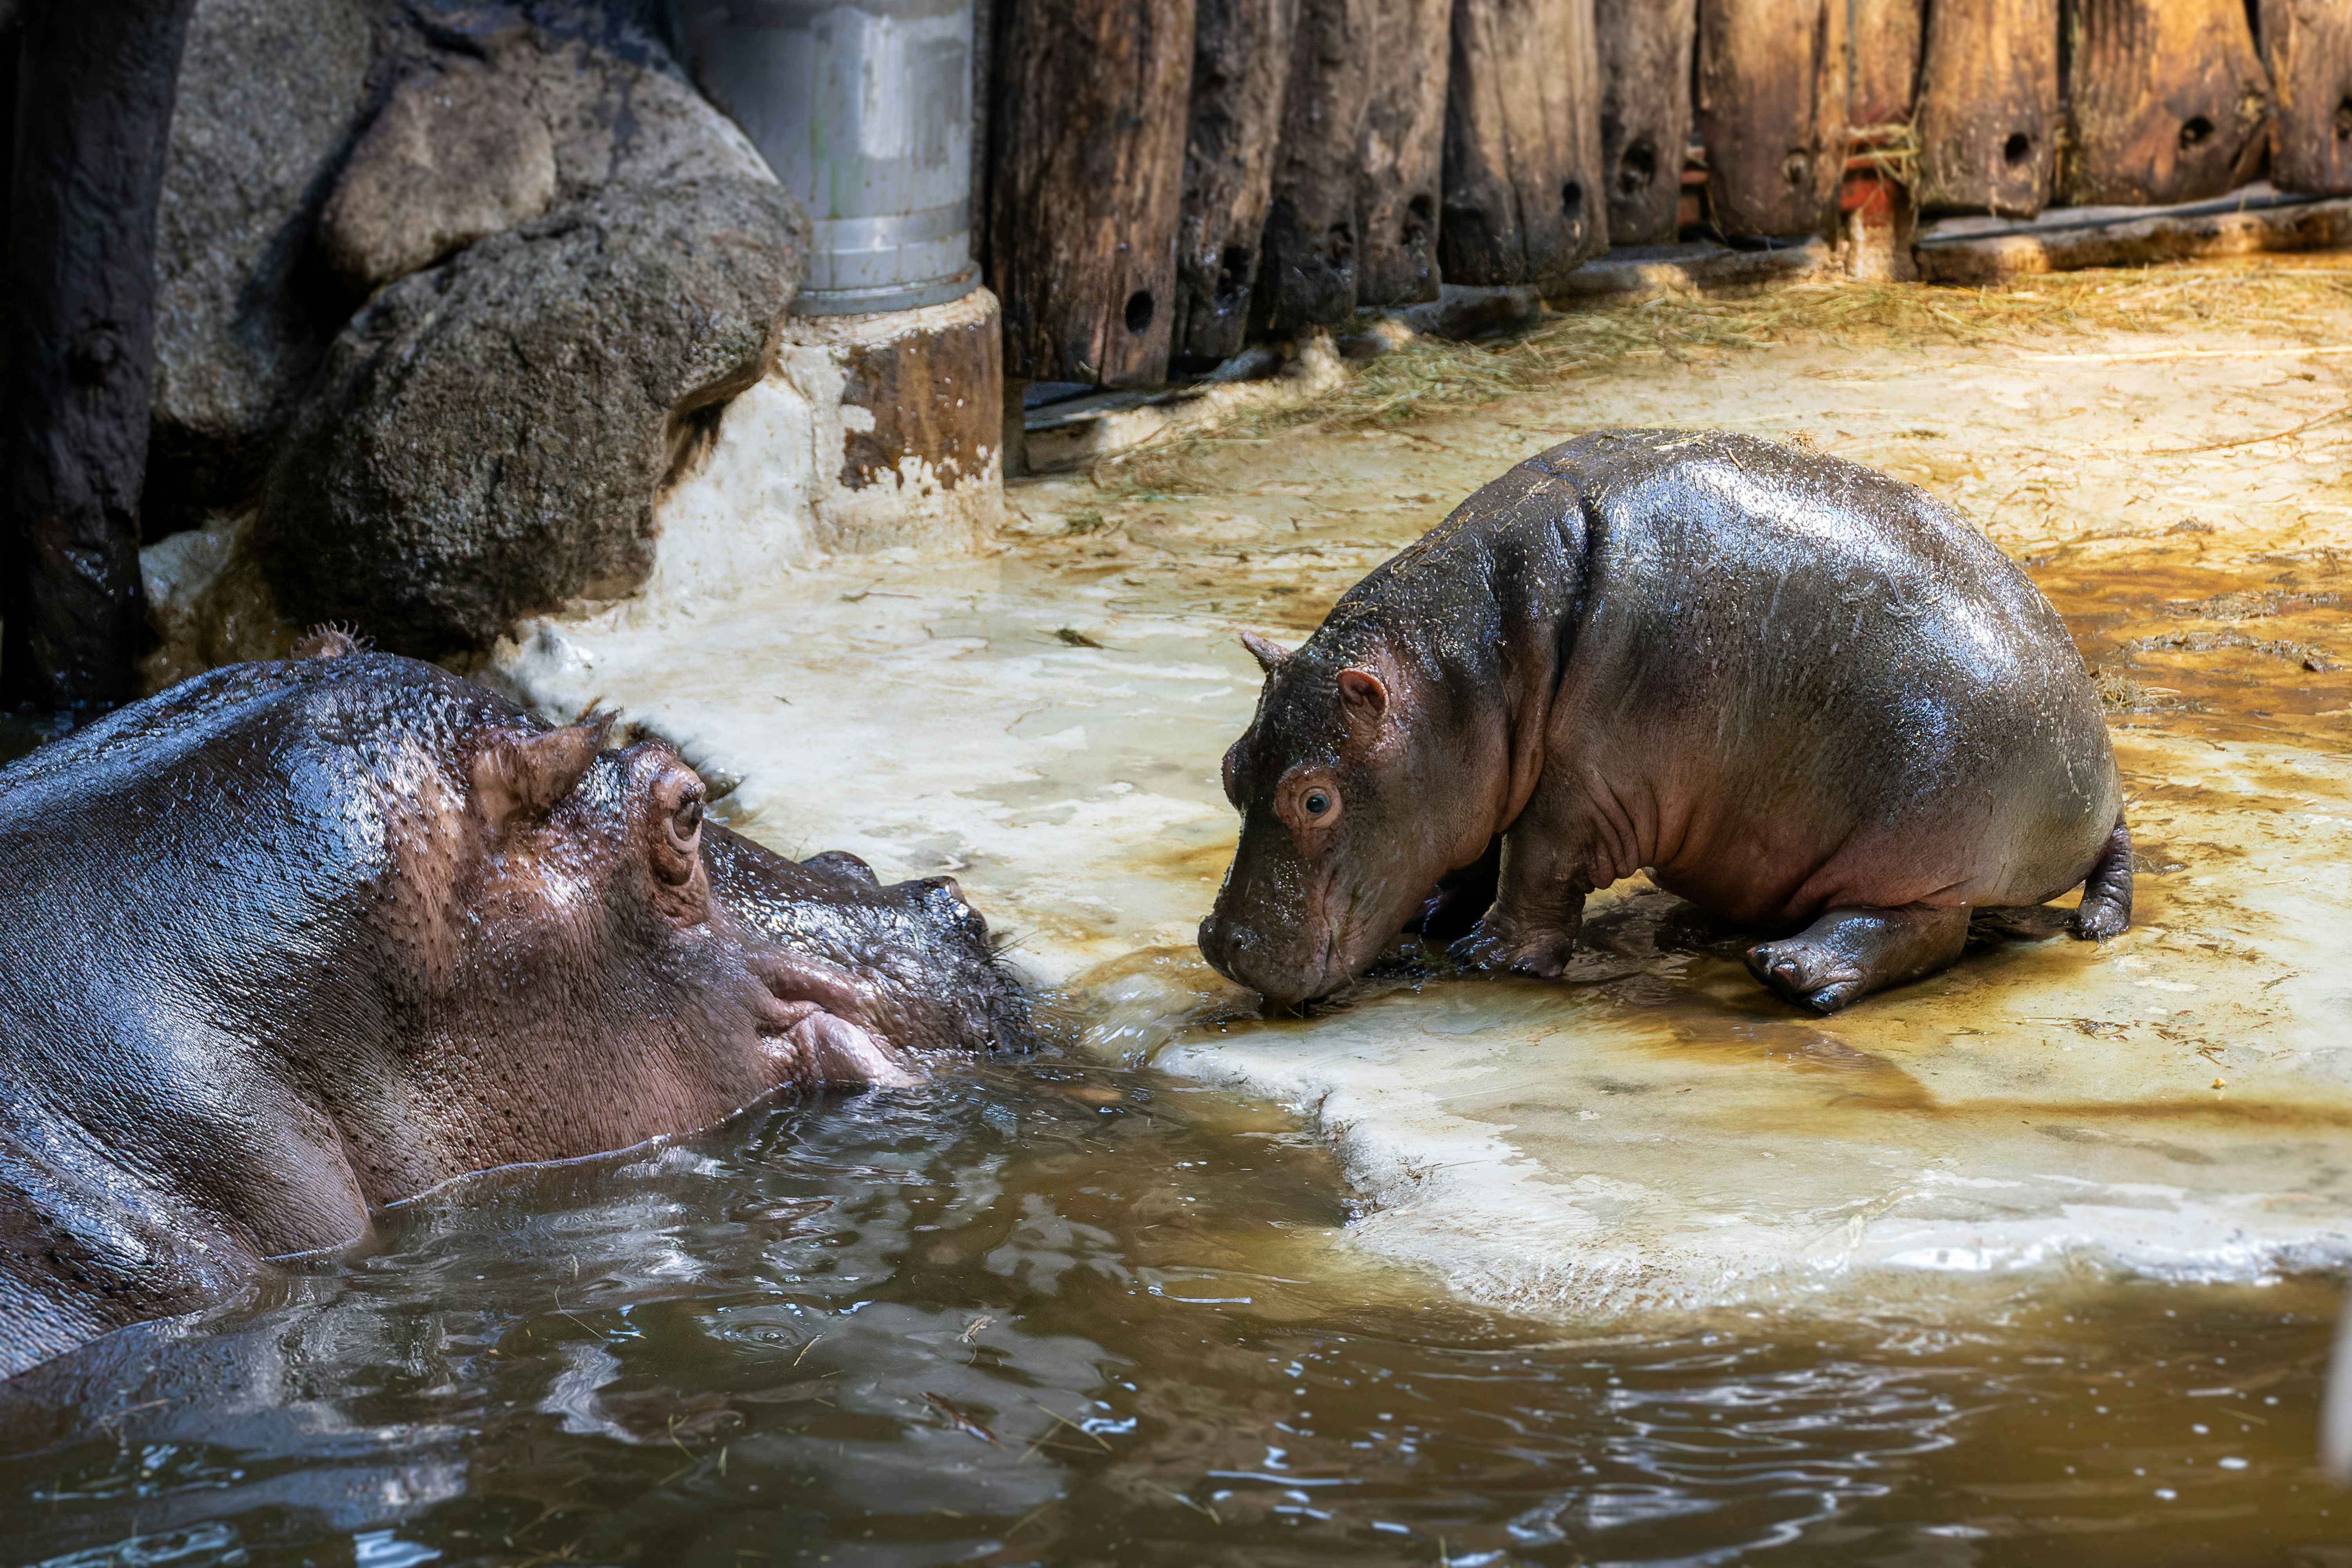 A mom and baby hippopotamus in a zoo.